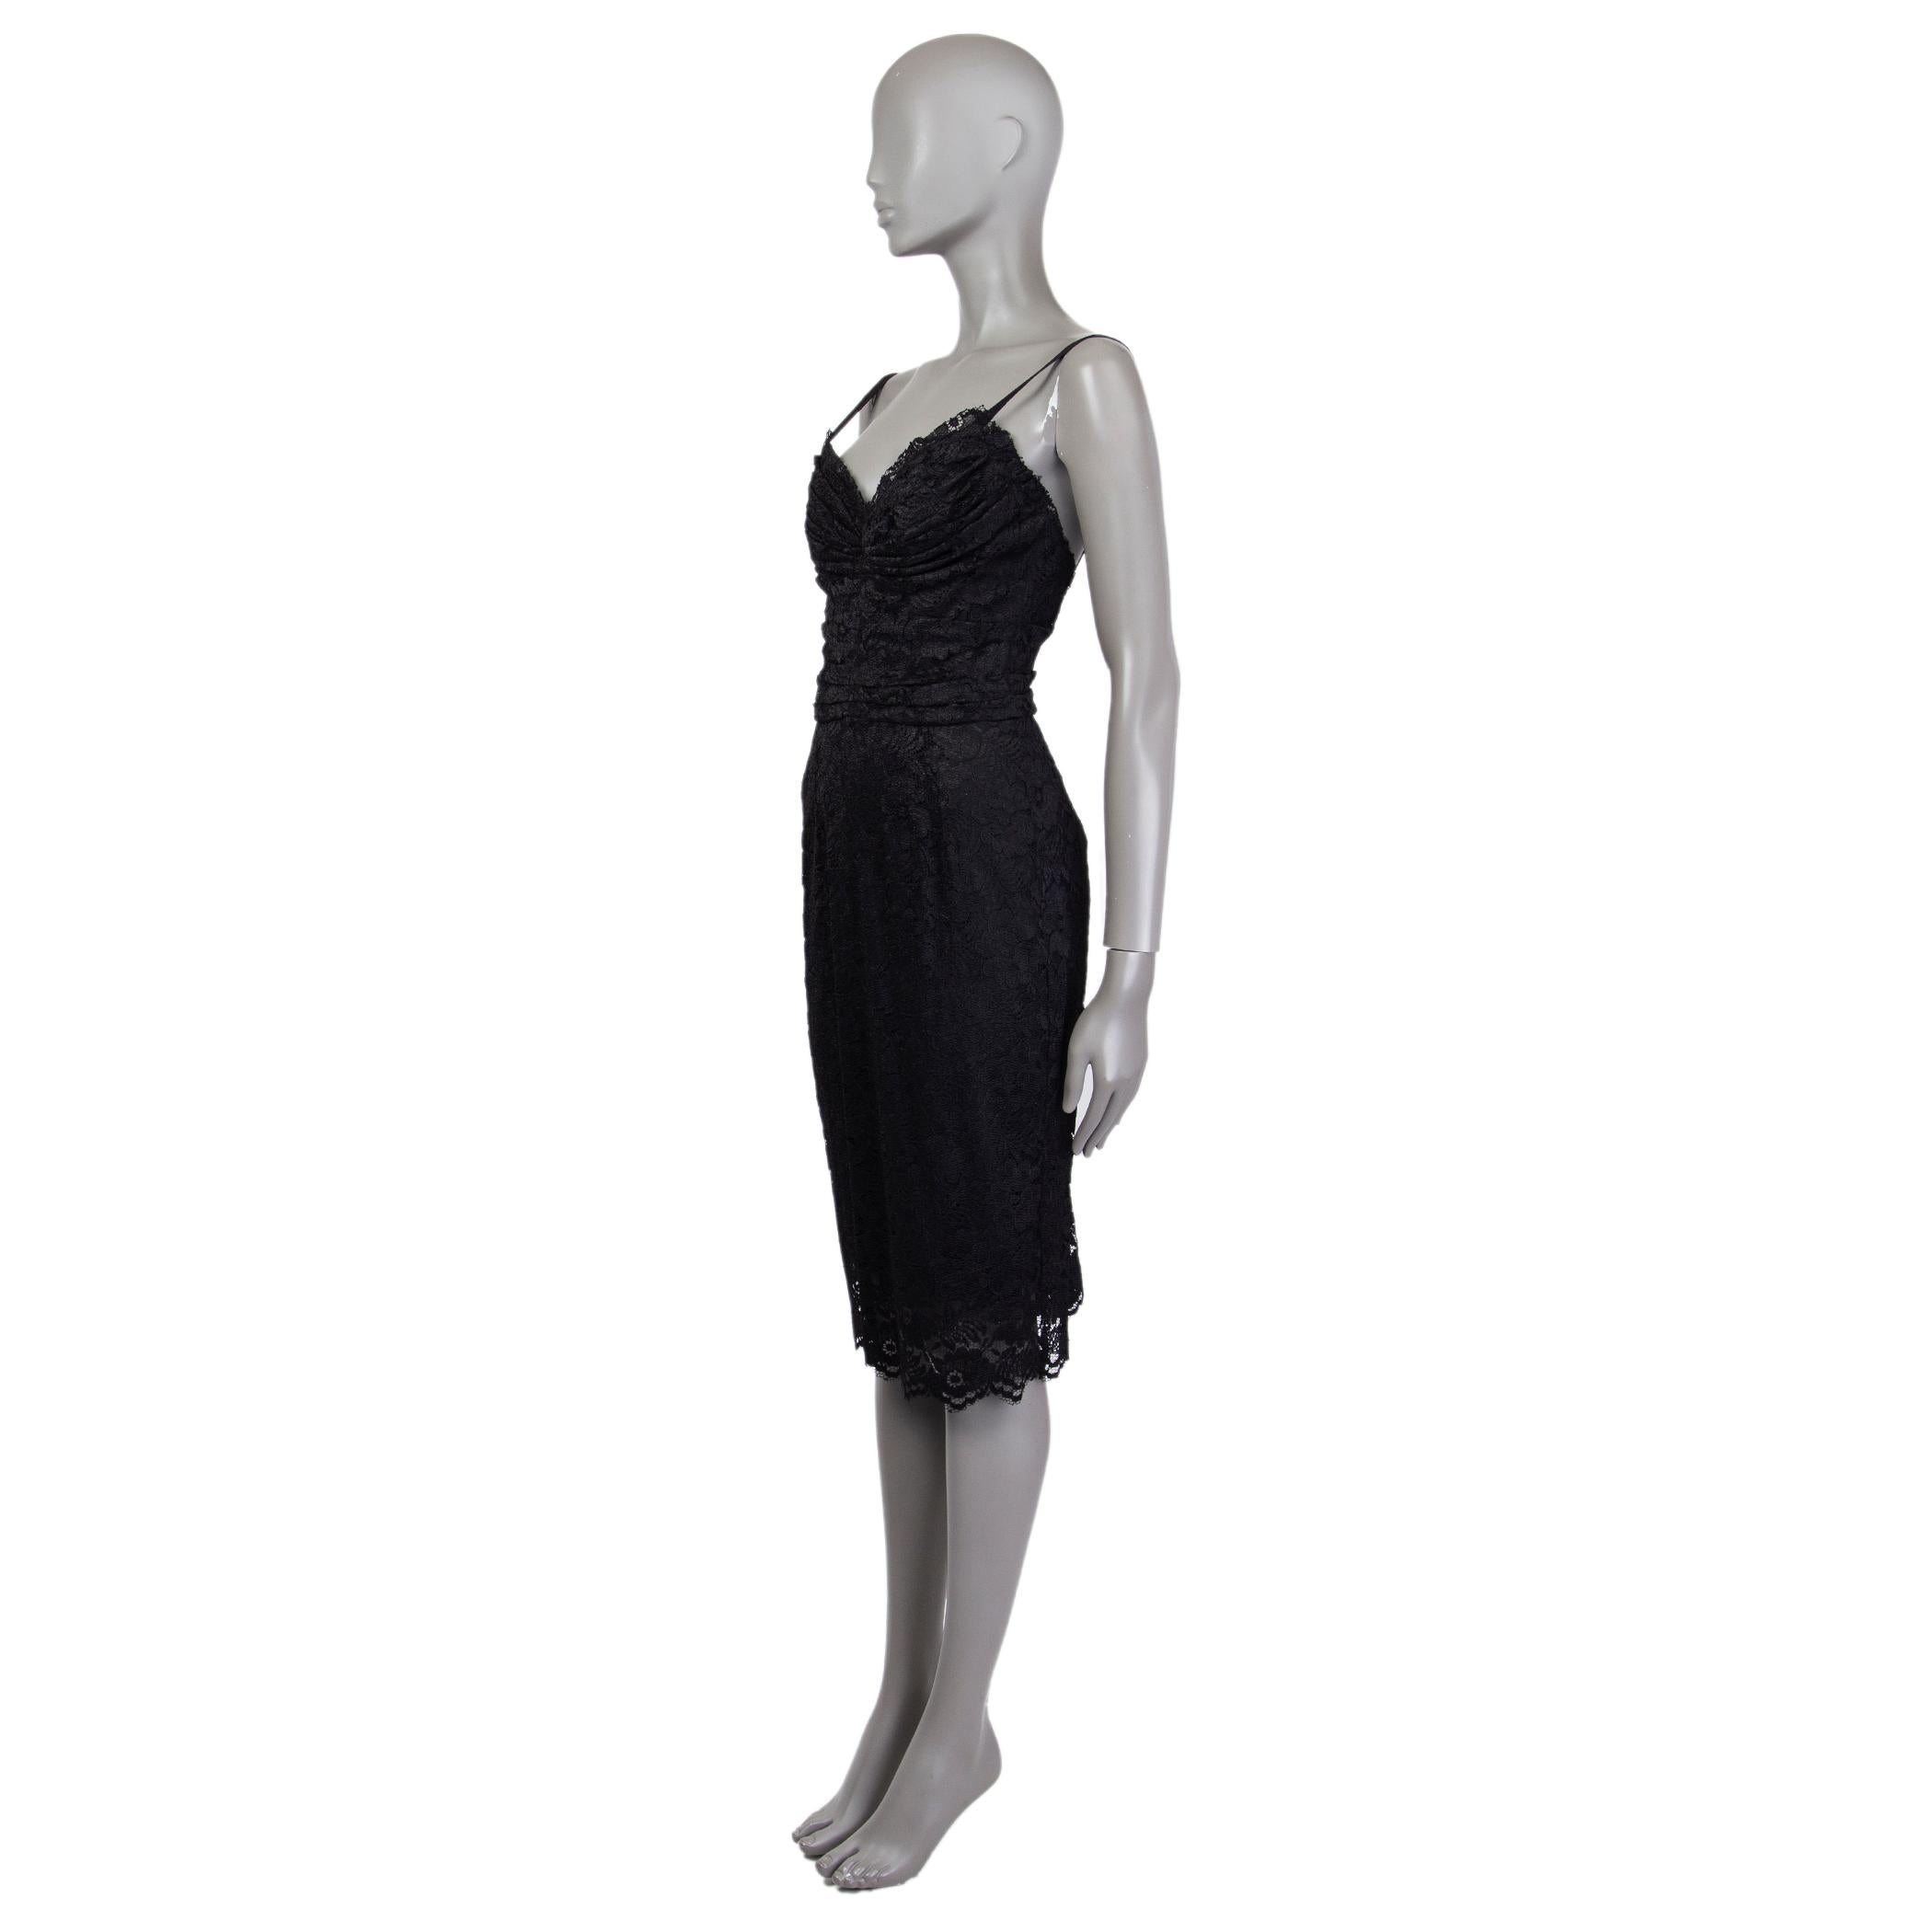 Dolce & Gabbana bustier lace sheath dress in black viscose (90%) and nylon (10%). With with pleated bust and spaghetti straps. Closes with concealed hook and metal zipper on the back. Lined in black silk (96%) and elastane (4%). Has been worn and is